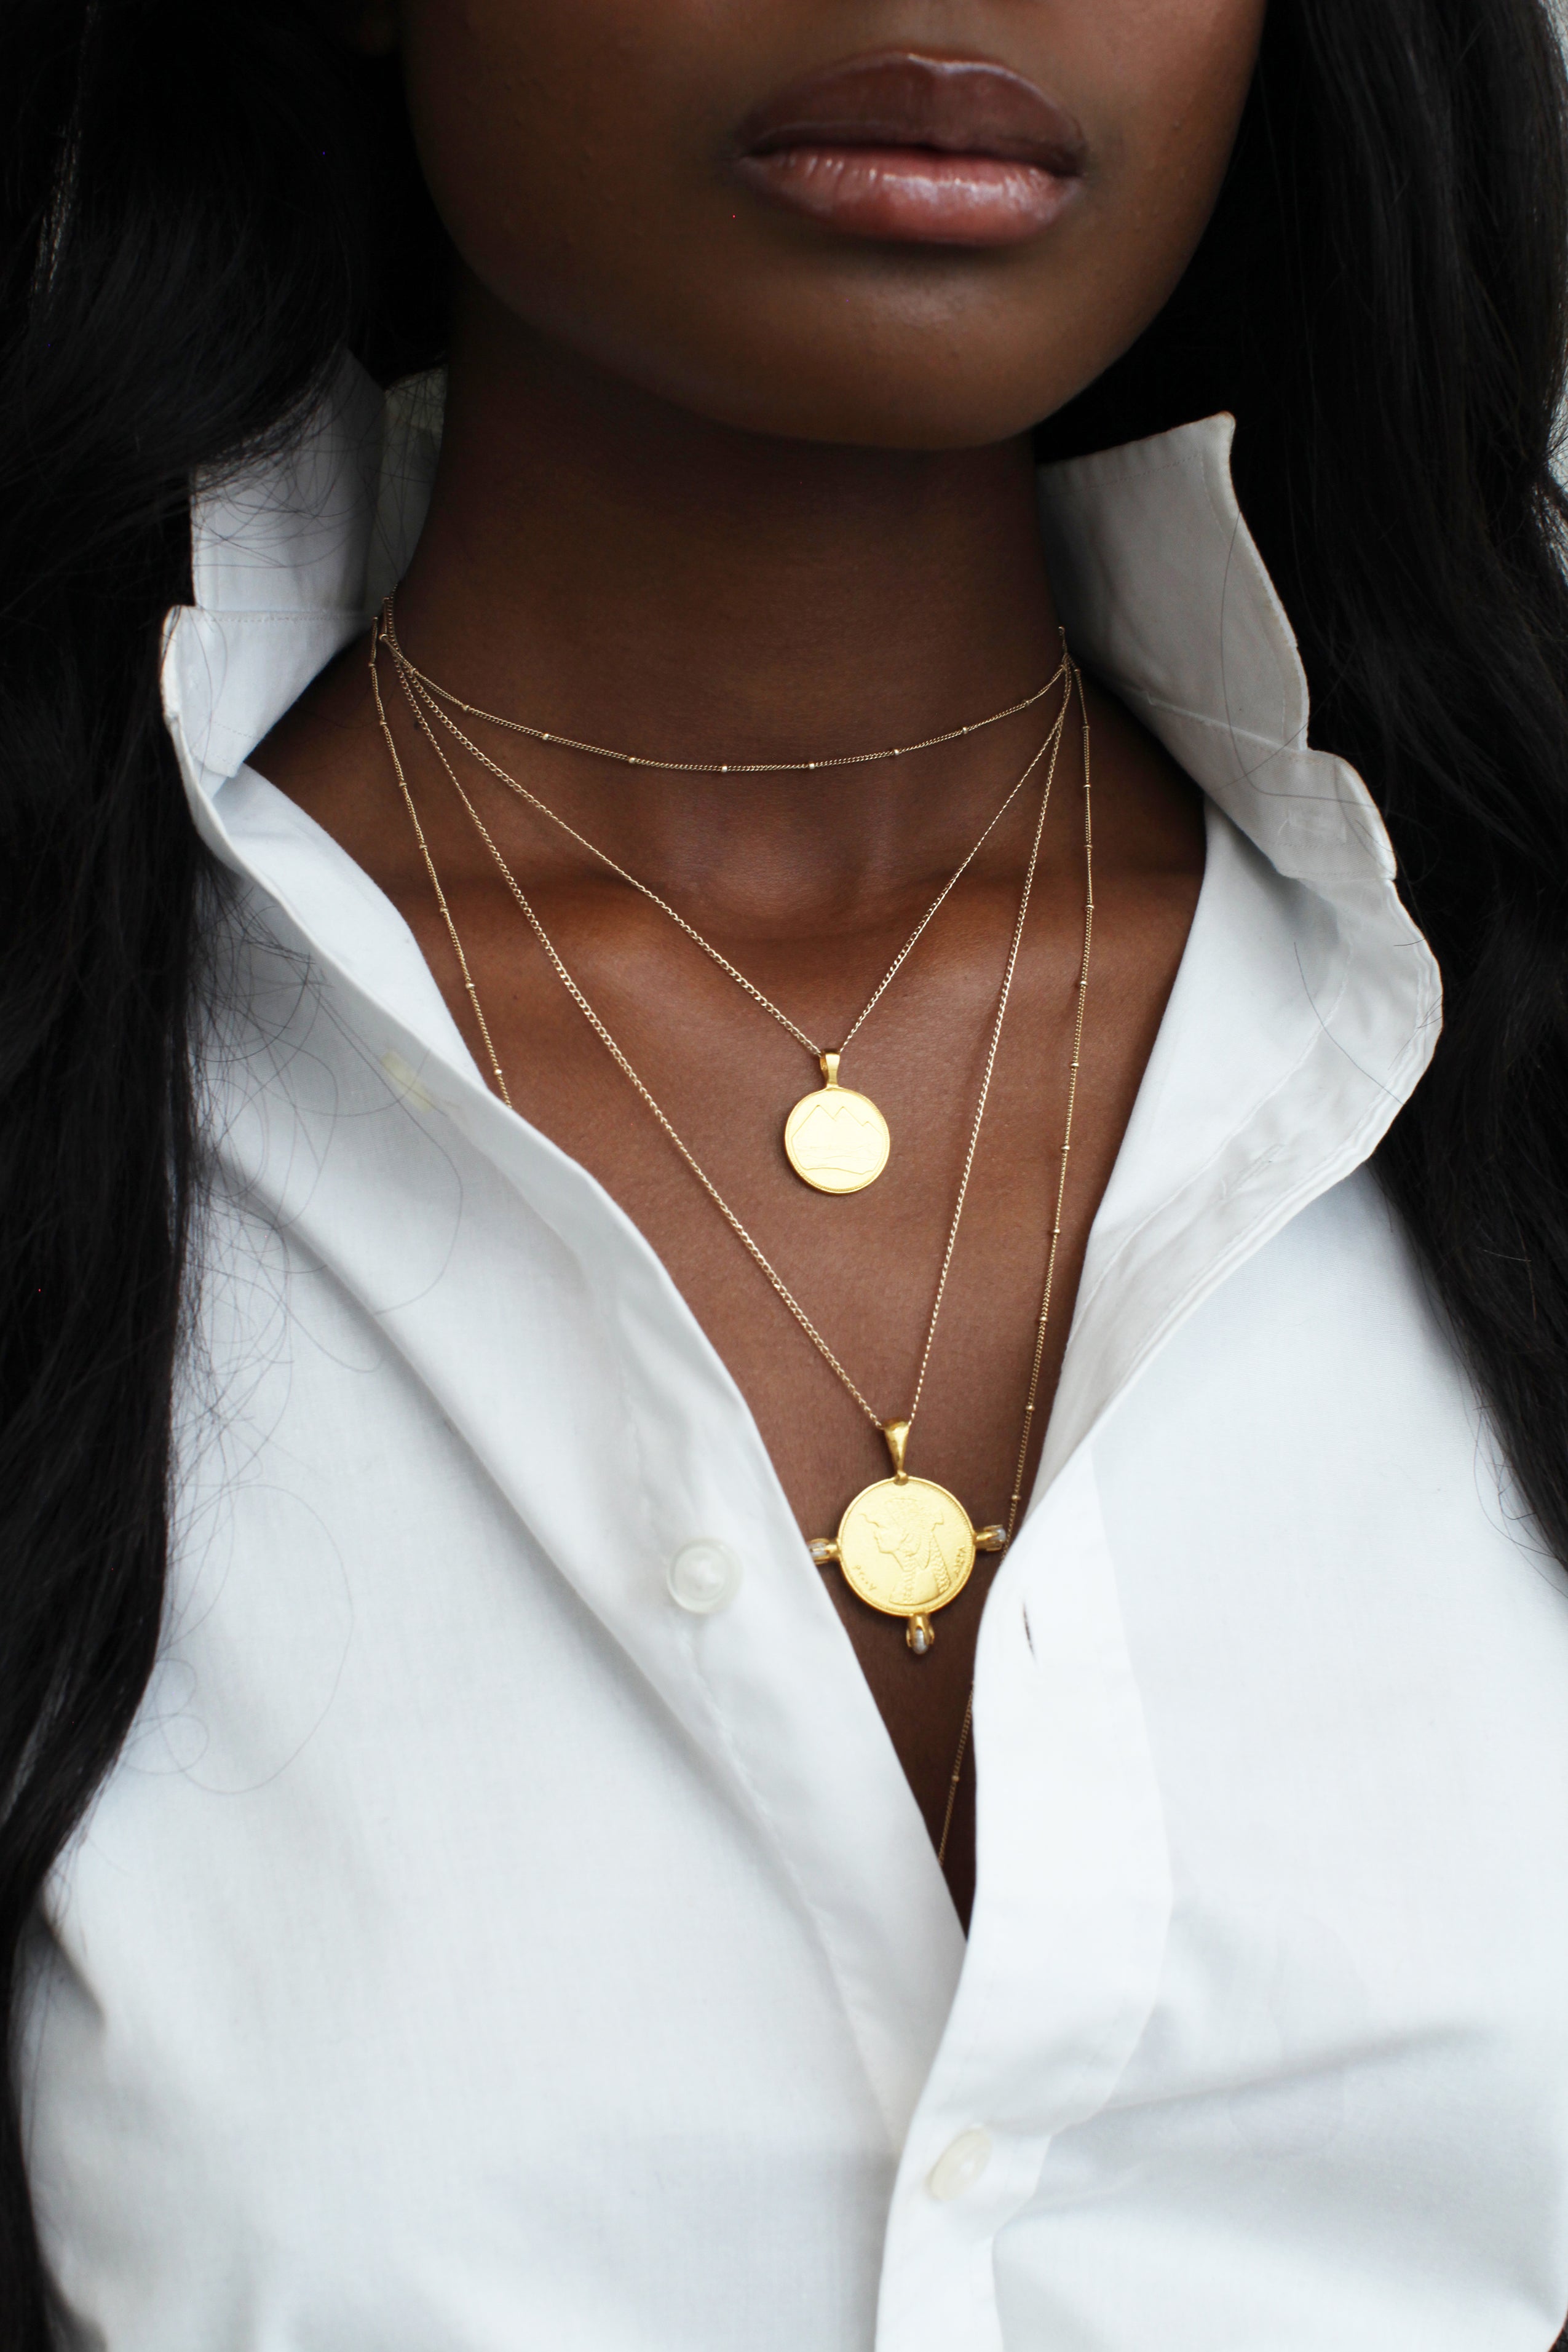 THE PYRAMID Coin Necklace